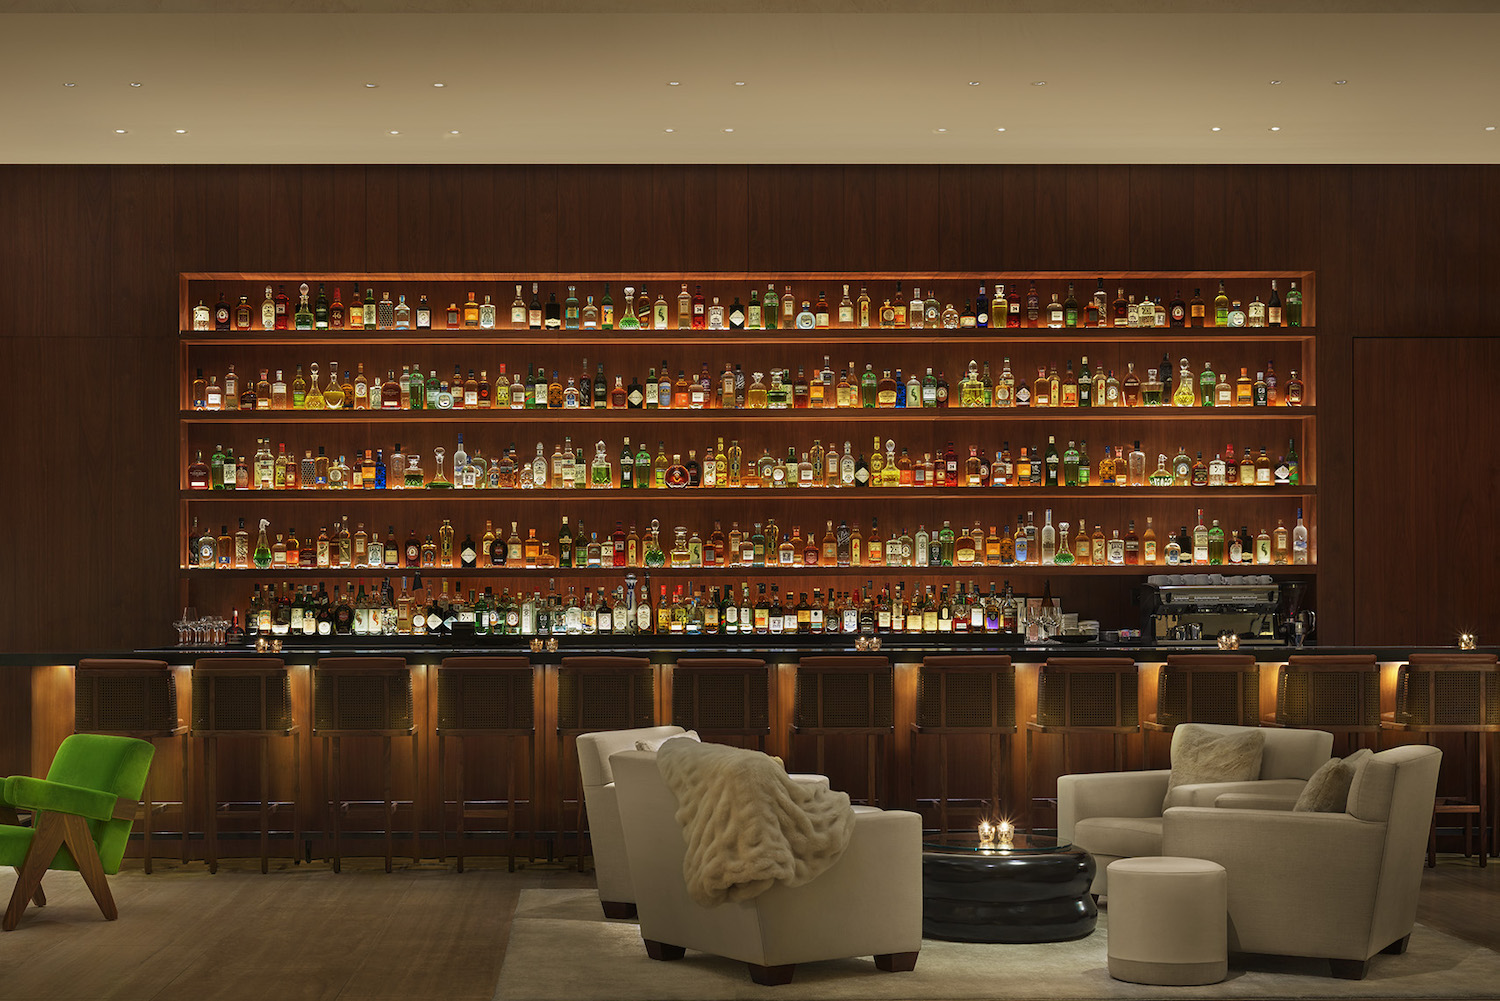 A large dark bar area with an incredibly wide bar rack with dim lighting and a seating area in front of the bar